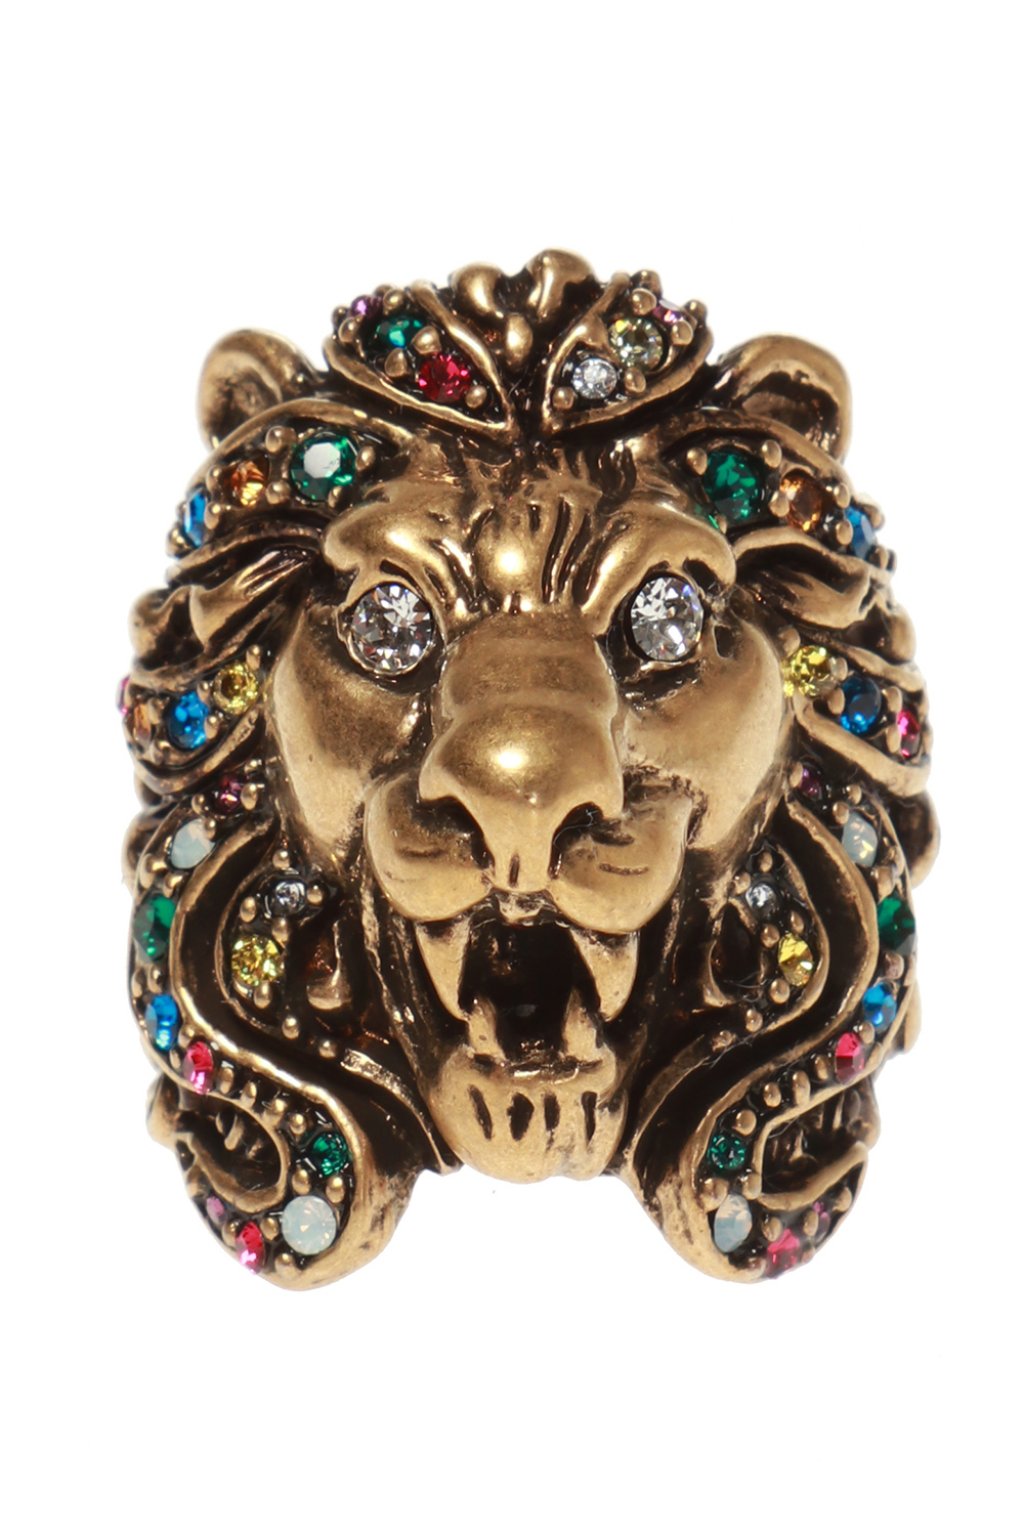 gucci lion ring gold